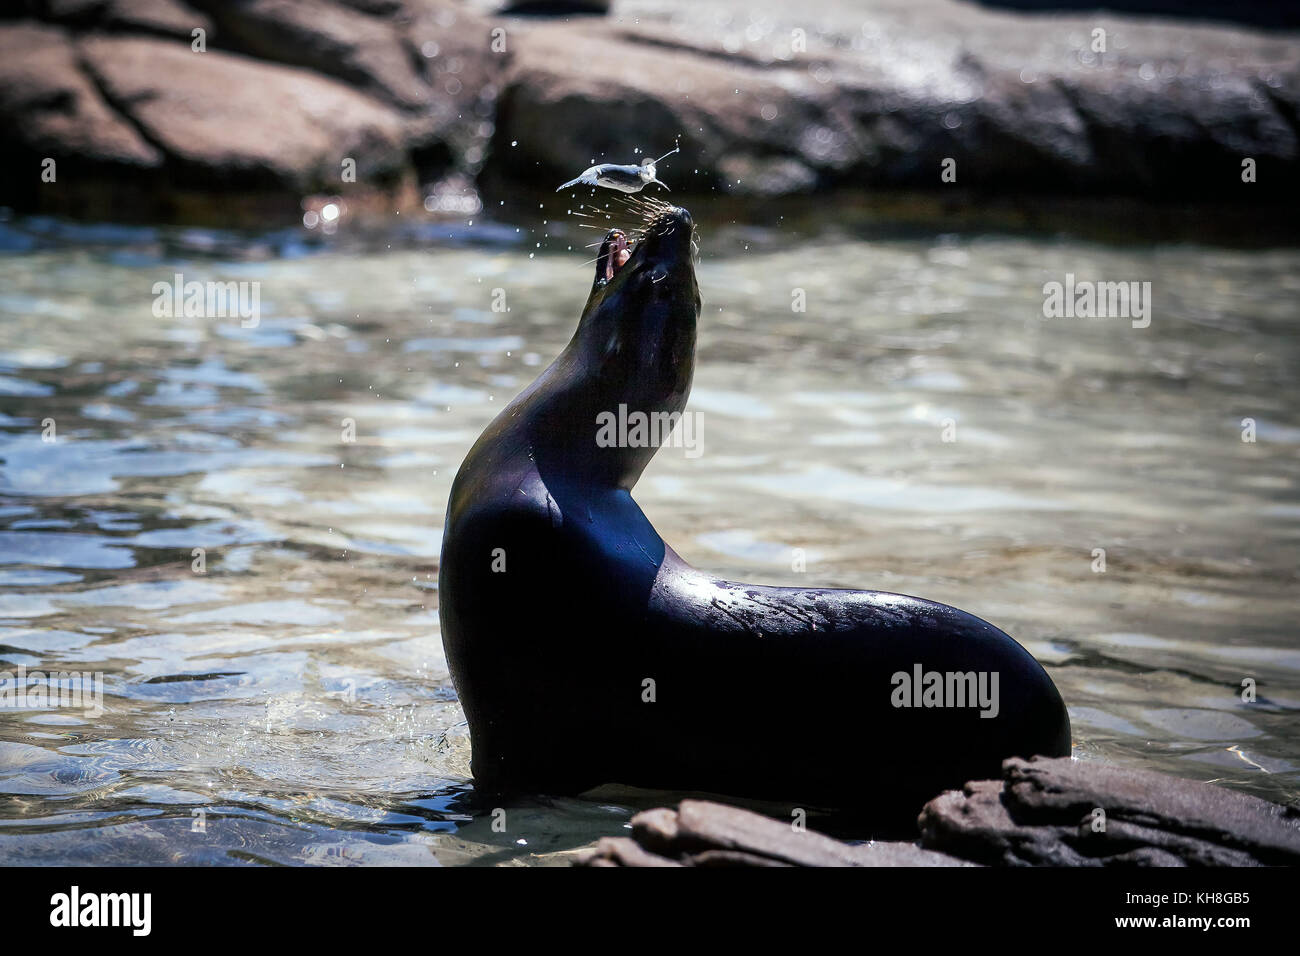 Seal catching fish in the wild Stock Photo